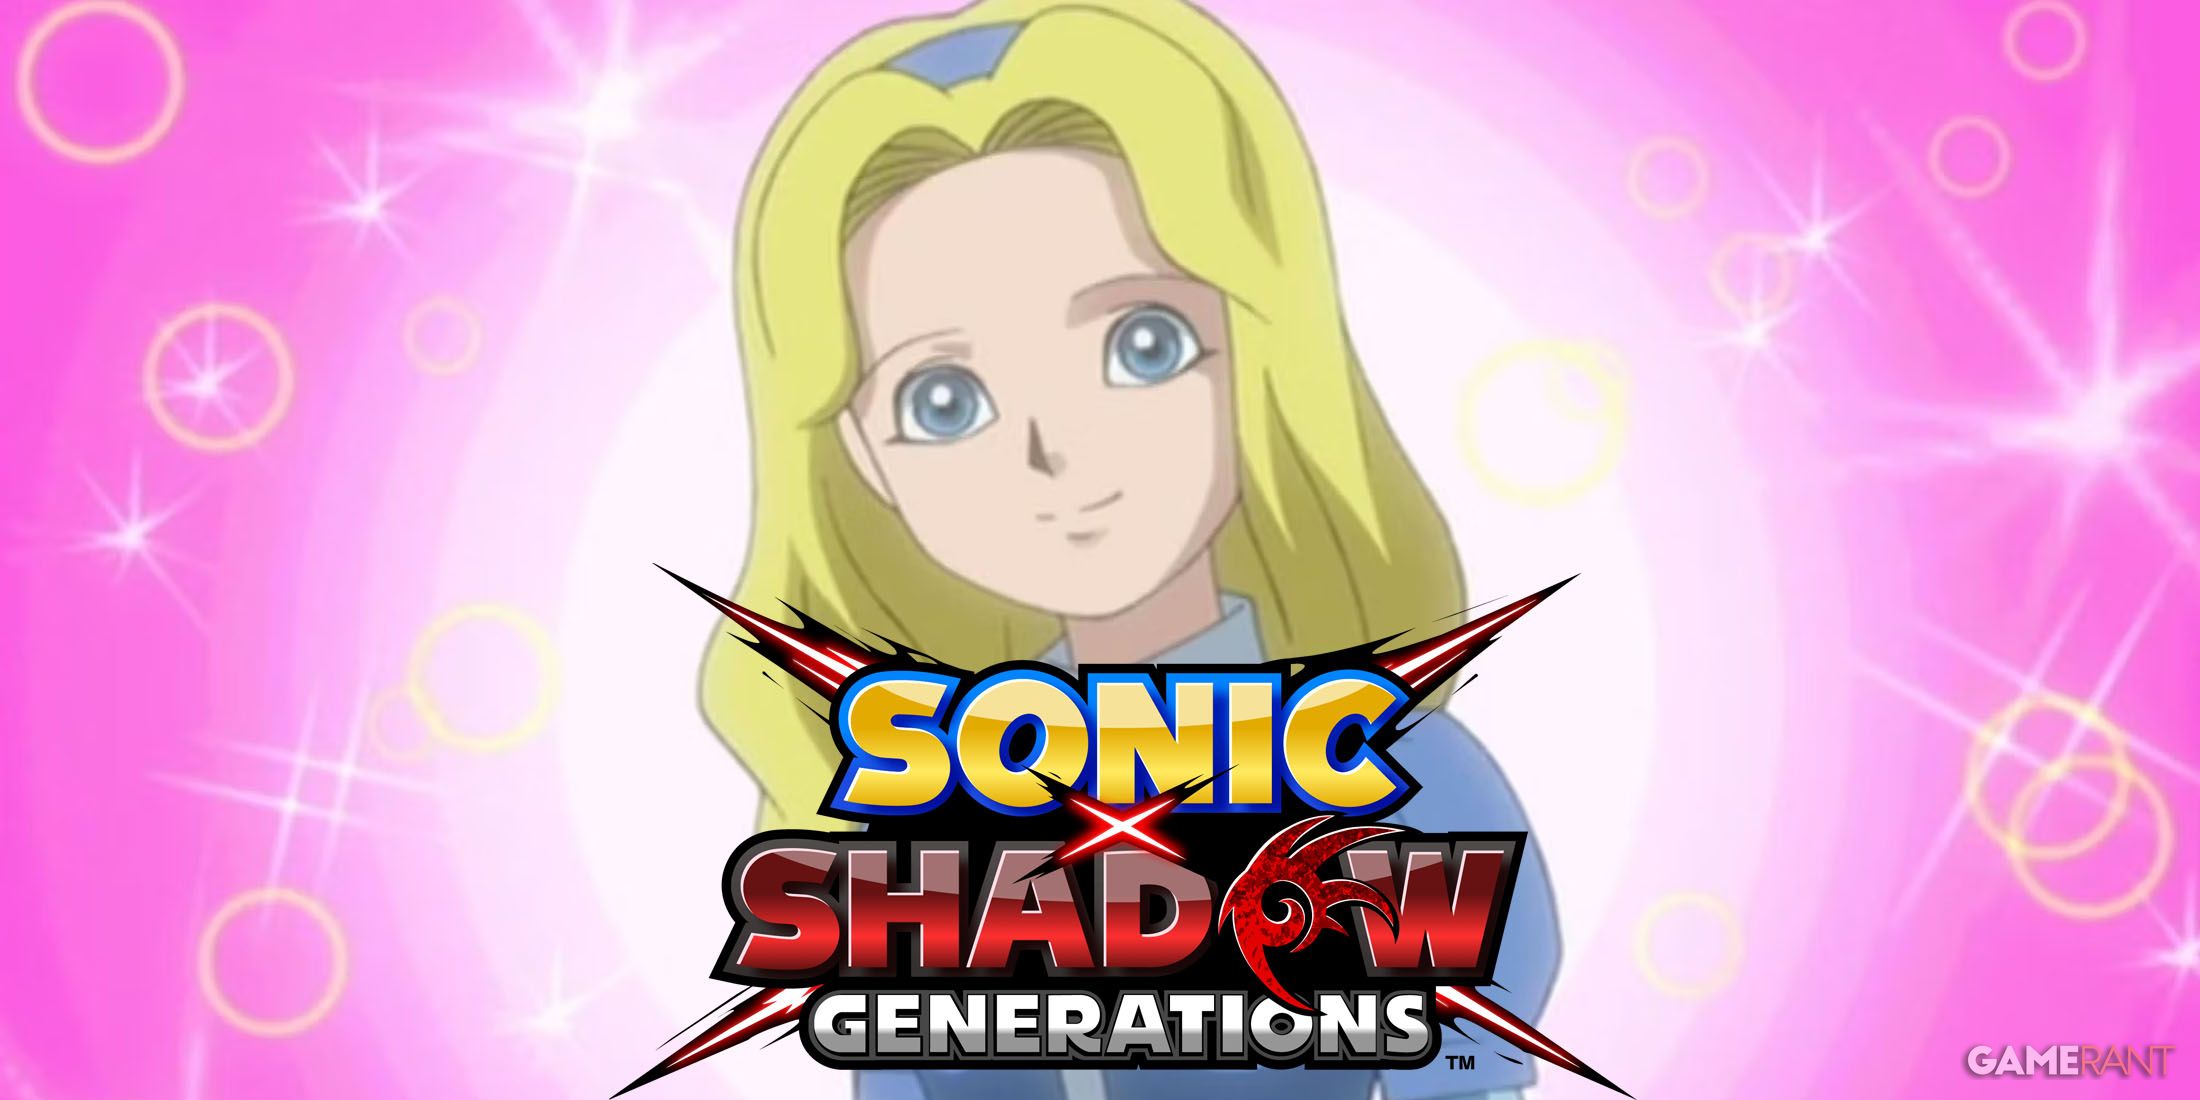 A screenshot of Maria Robotnik in Sonic X with the Sonic X Shadow Generations logo placed below her.